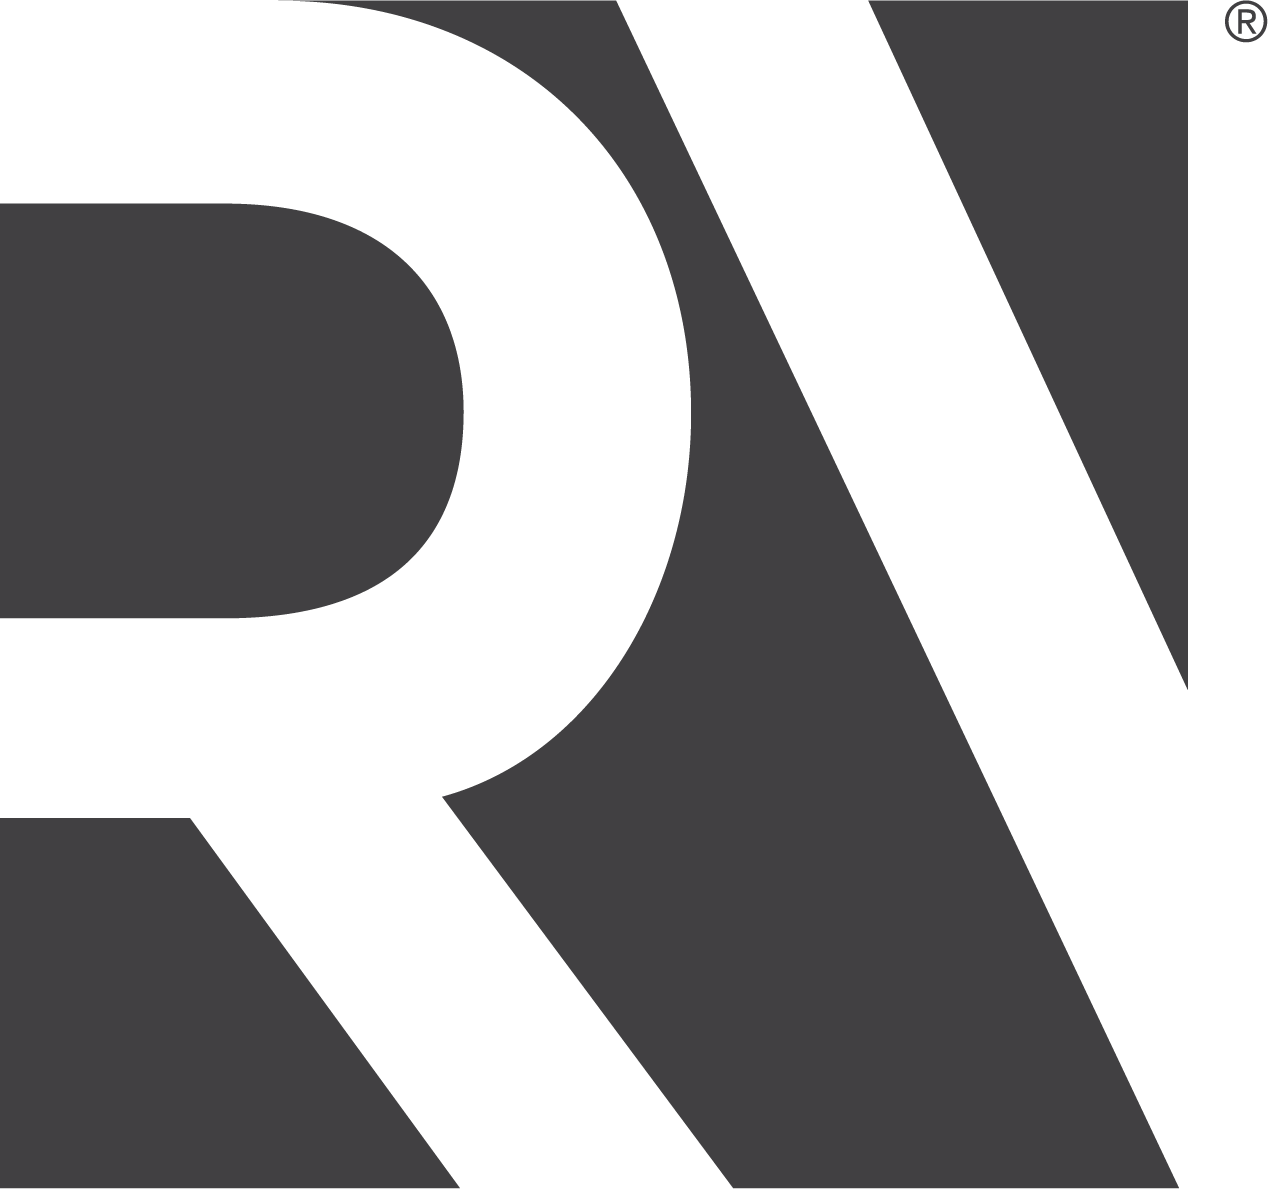 Image of just the letters from the RealVitalize logo